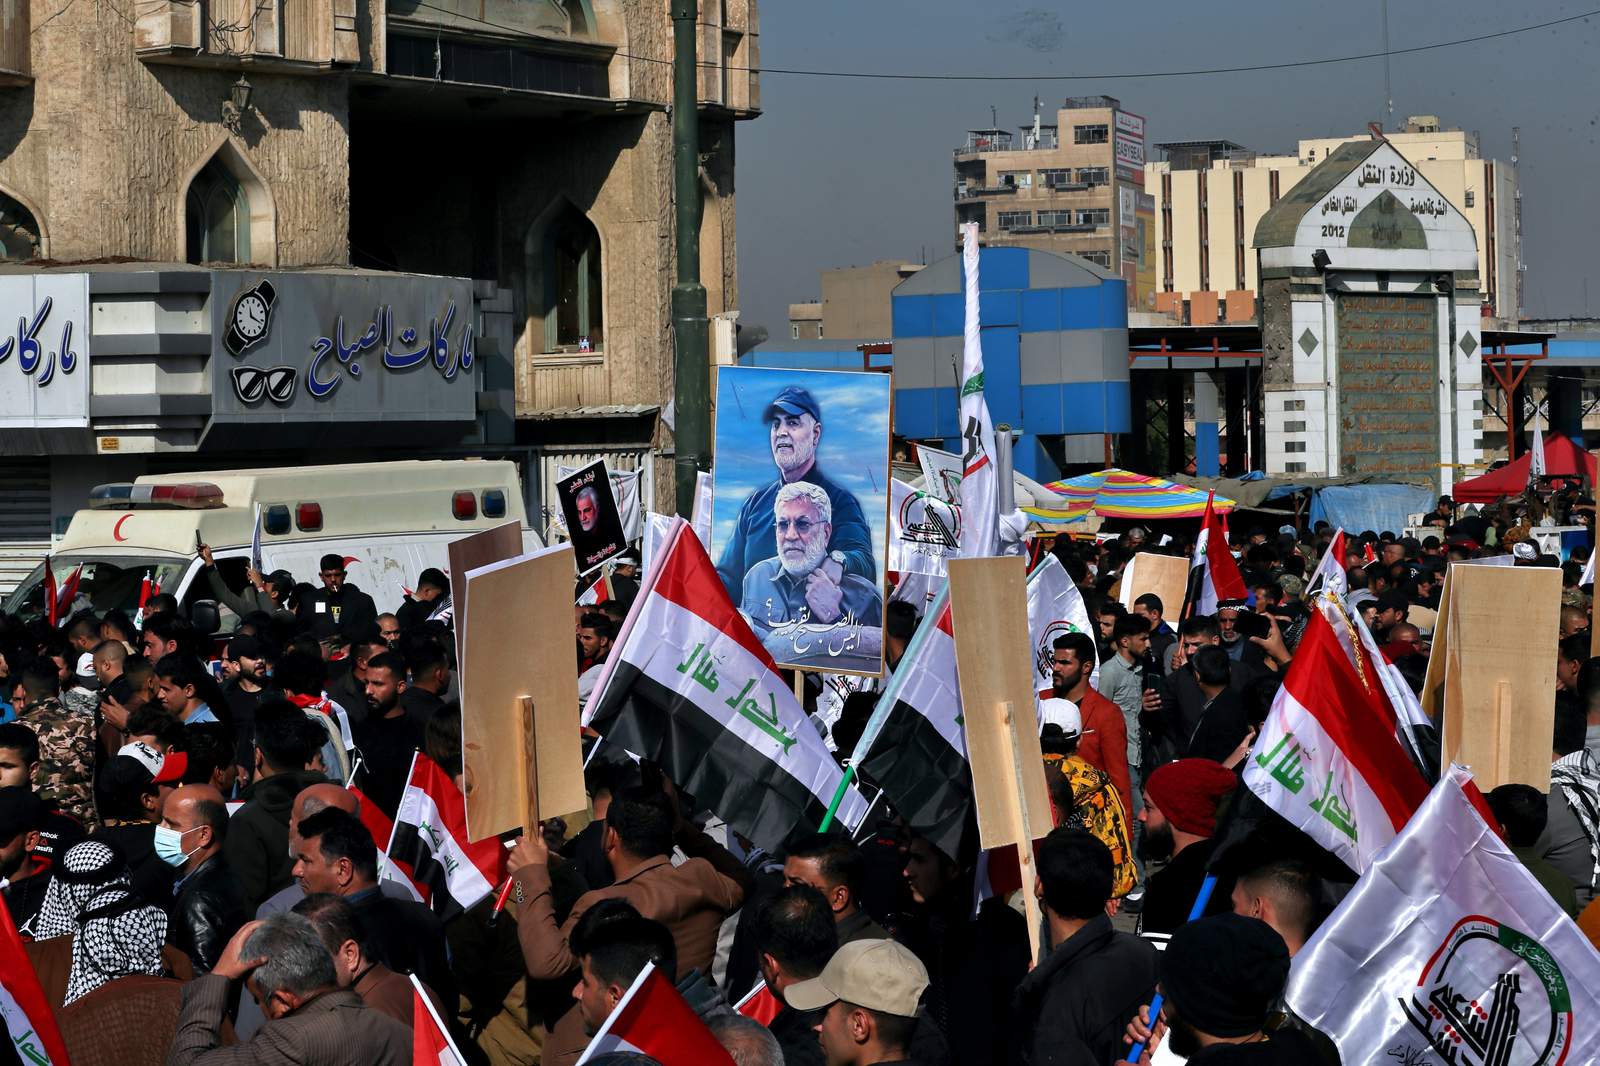 Rally in Baghdad marks 1 year since Iran general's killing